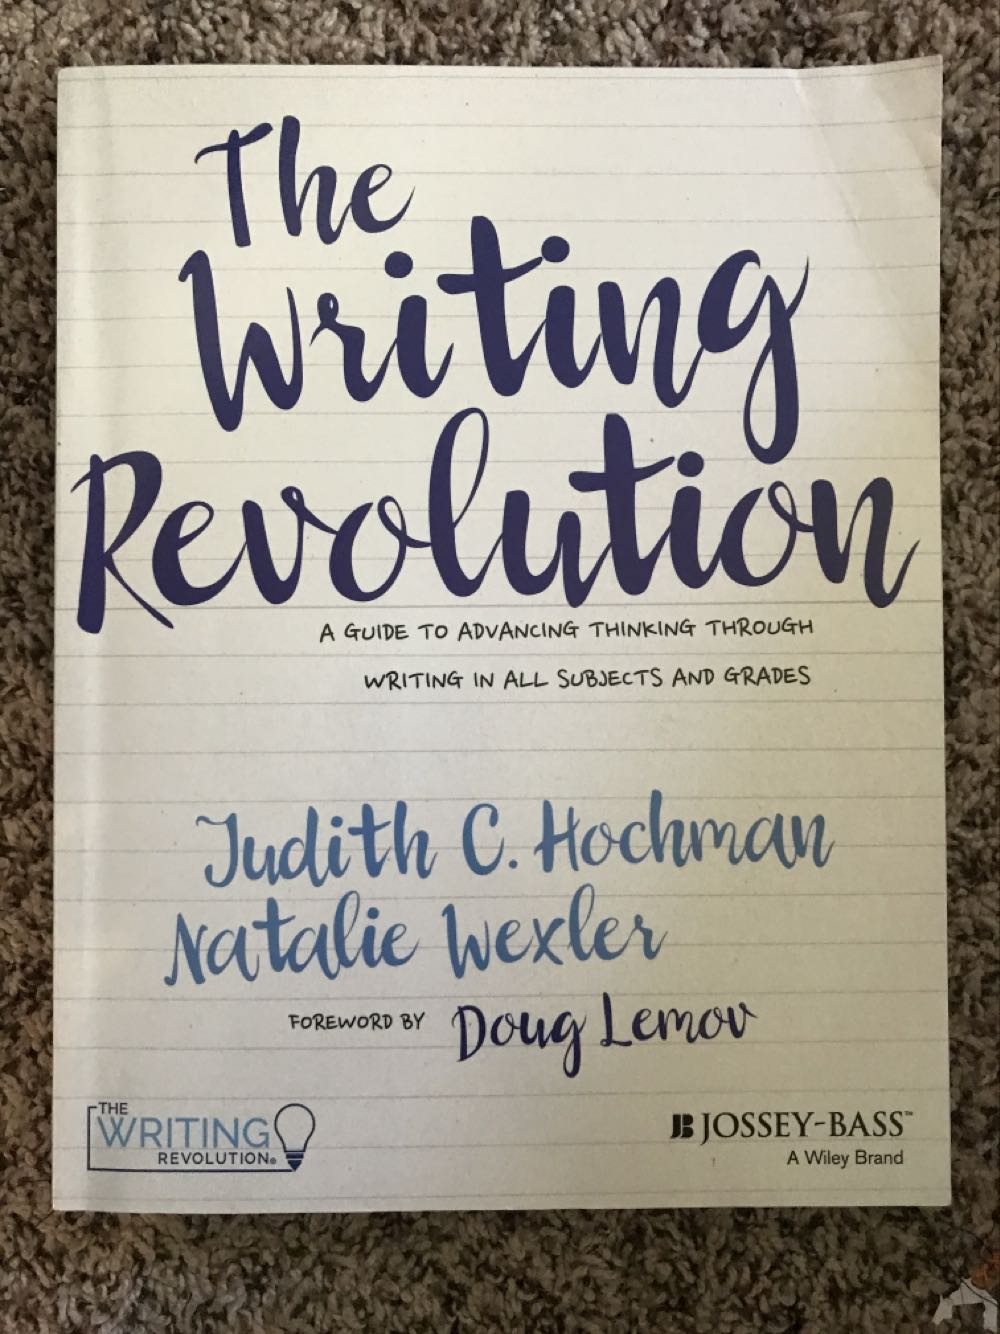 Writing Revolution, The - Judith C. Hochman (John Wiley & Sons) book collectible [Barcode 9781119364917] - Main Image 1